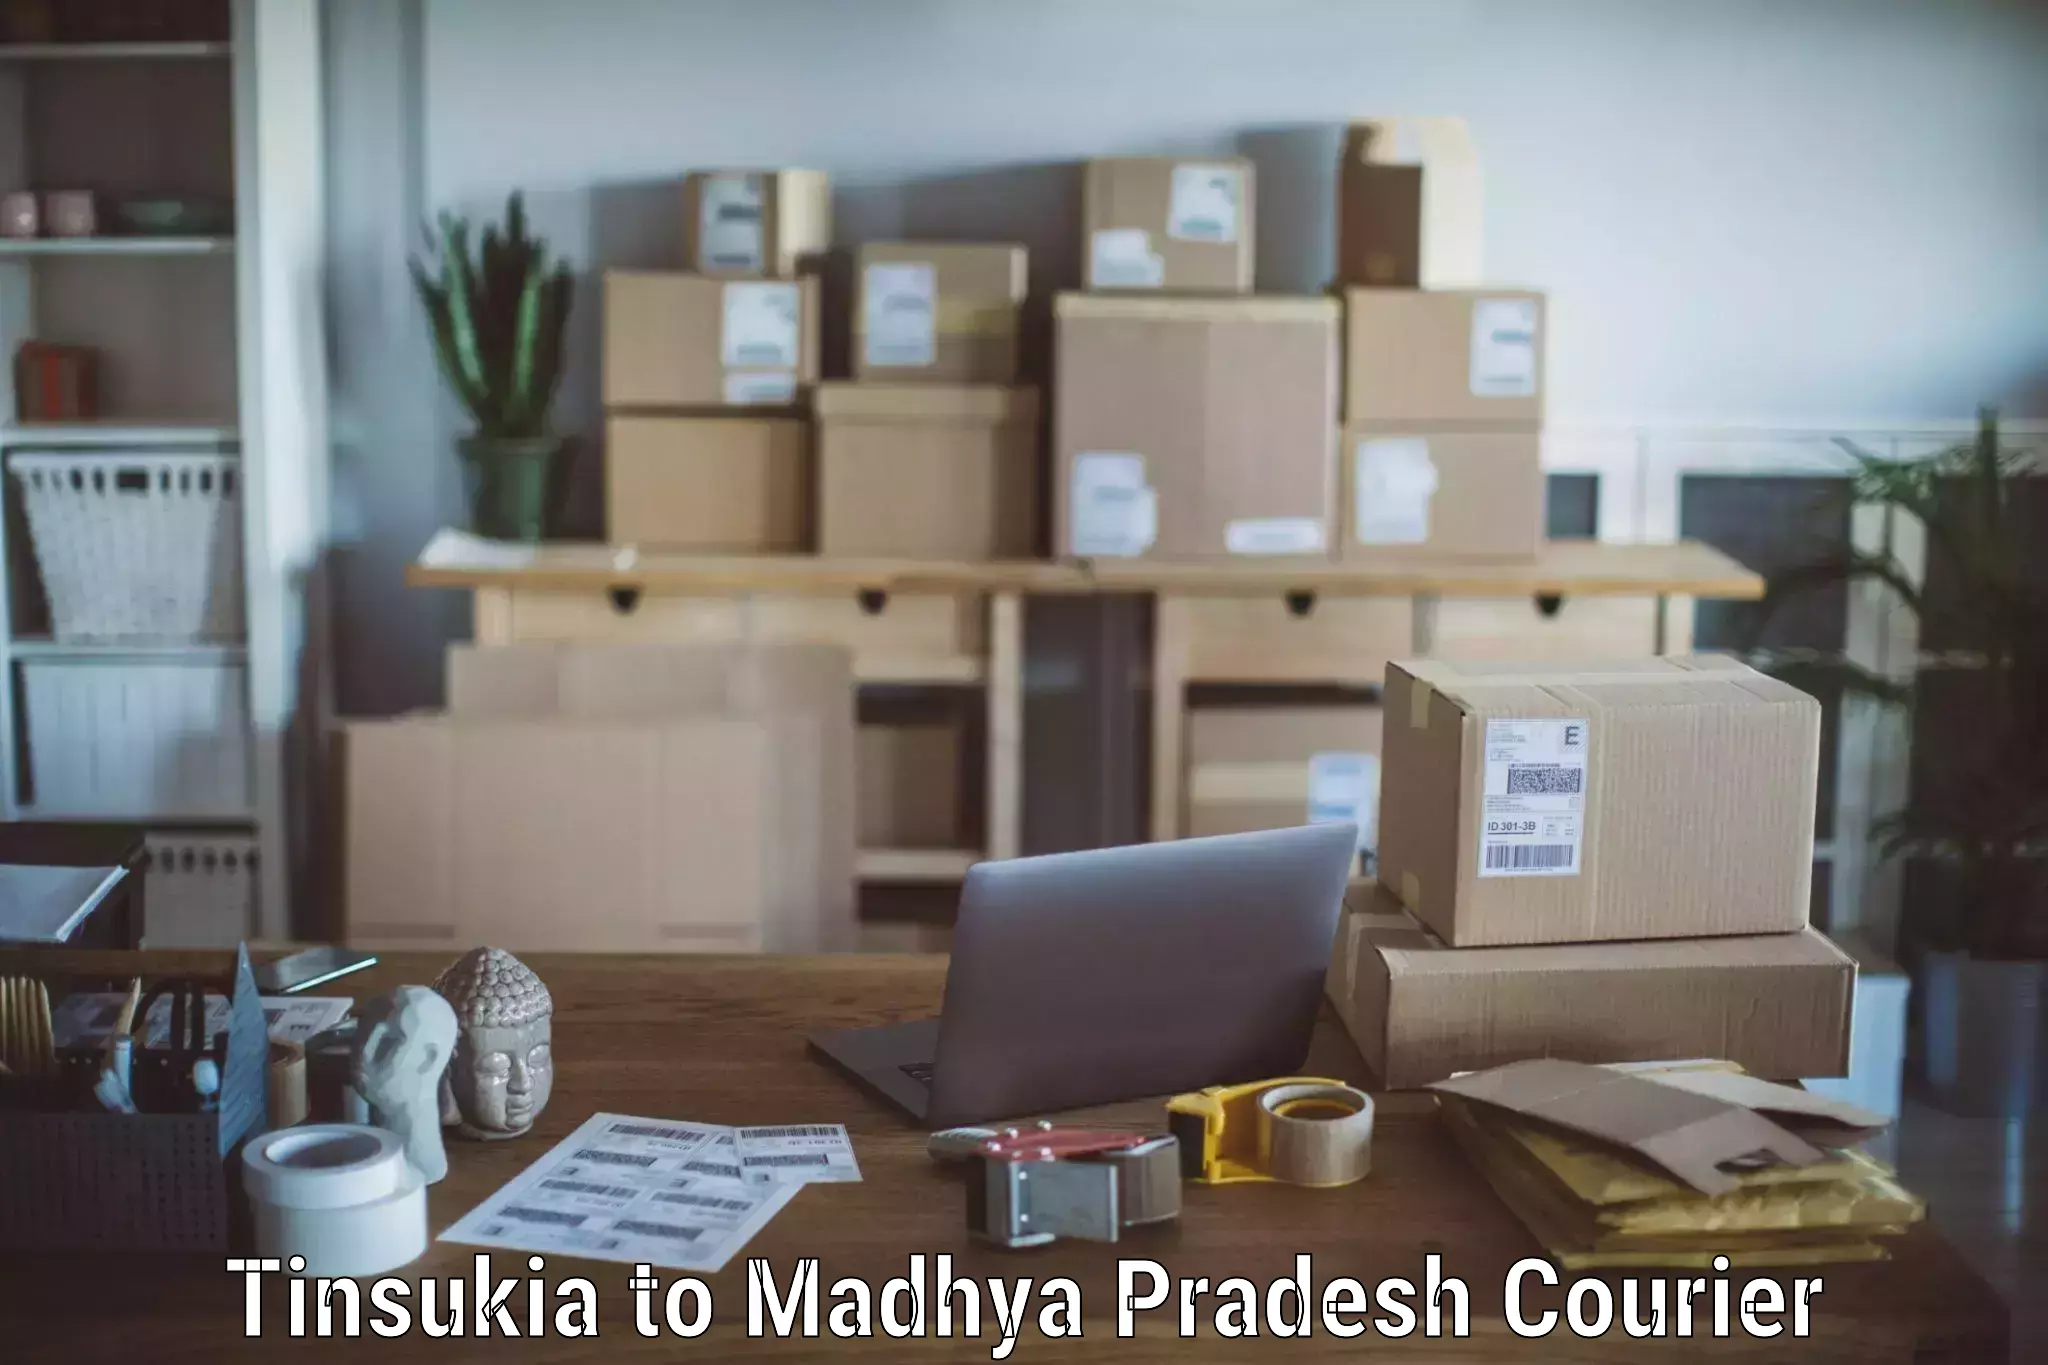 Budget-friendly movers Tinsukia to Neemuch